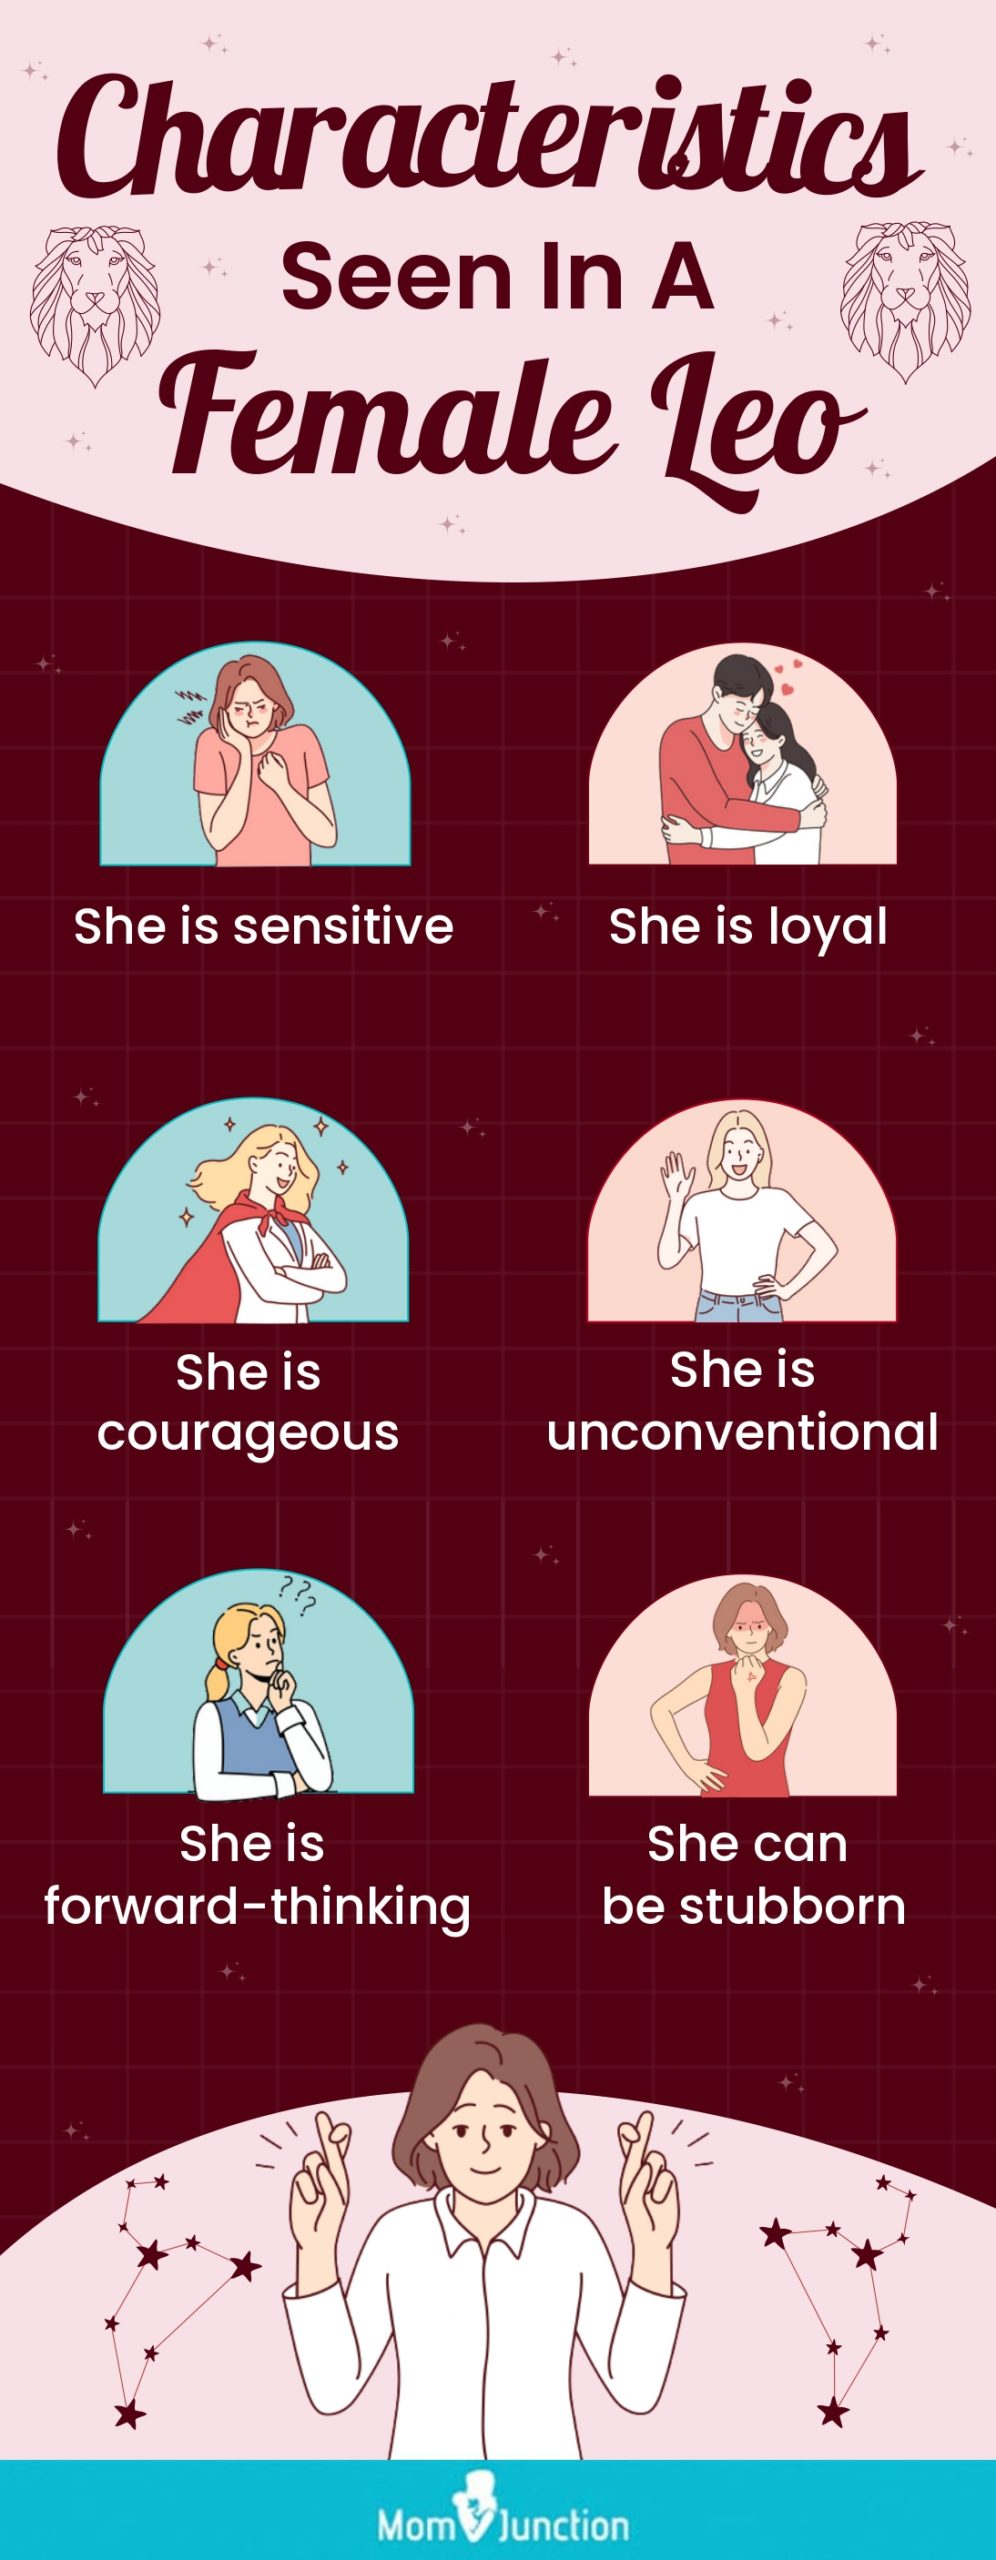 characteristics seen in a female leo (infographic)